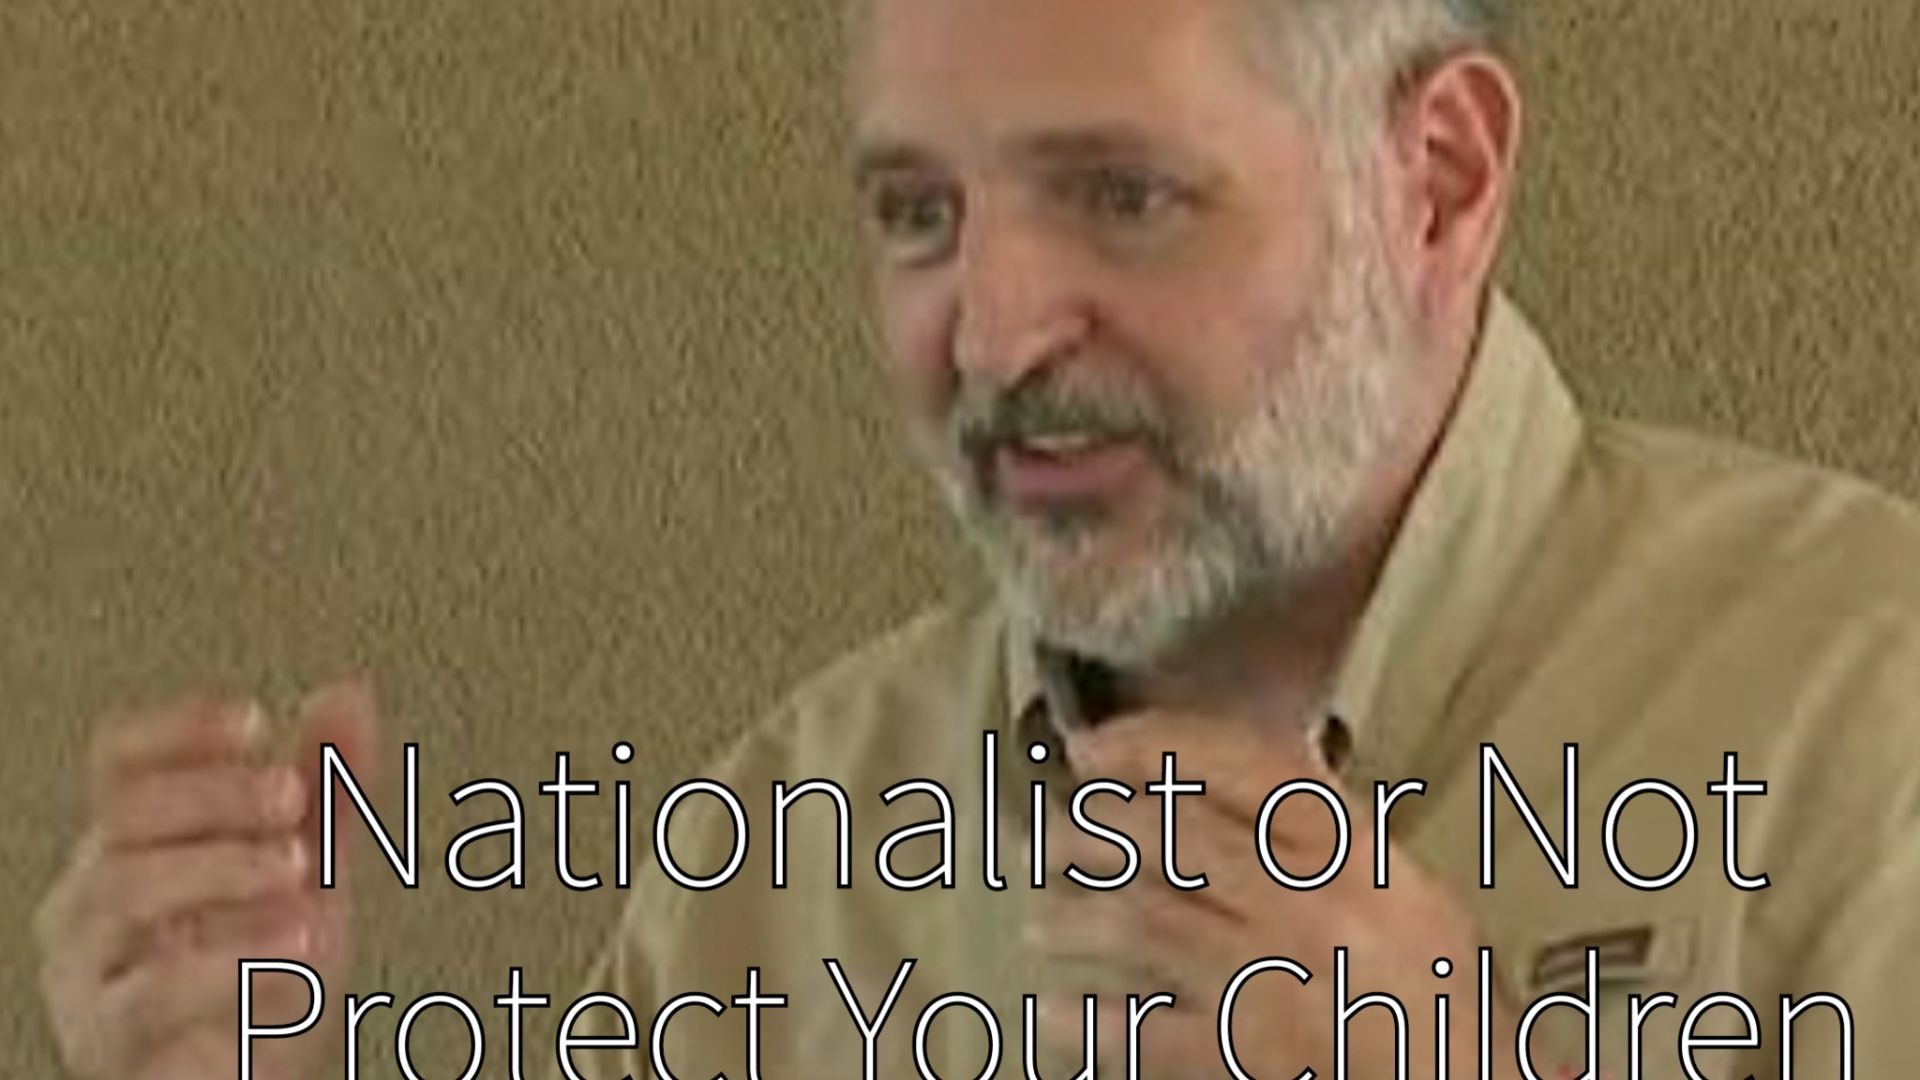 Protect Your Children by Patenting Them! WHAT?